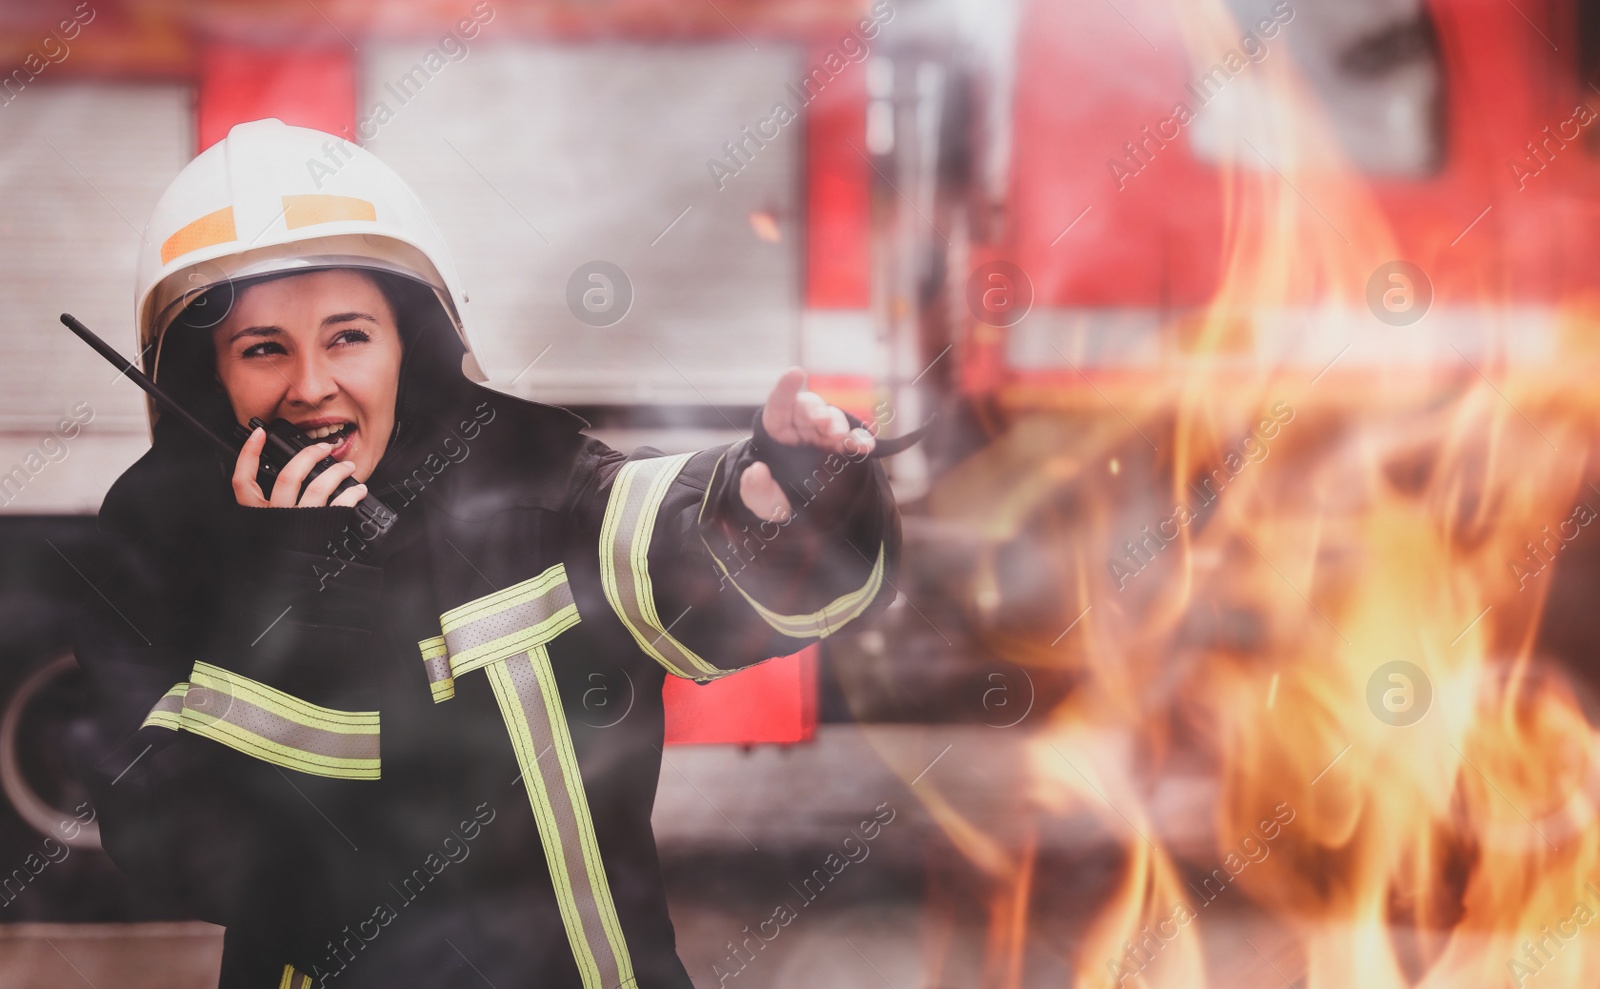 Image of Firefighter in uniform using portable radio set near fire truck outdoors